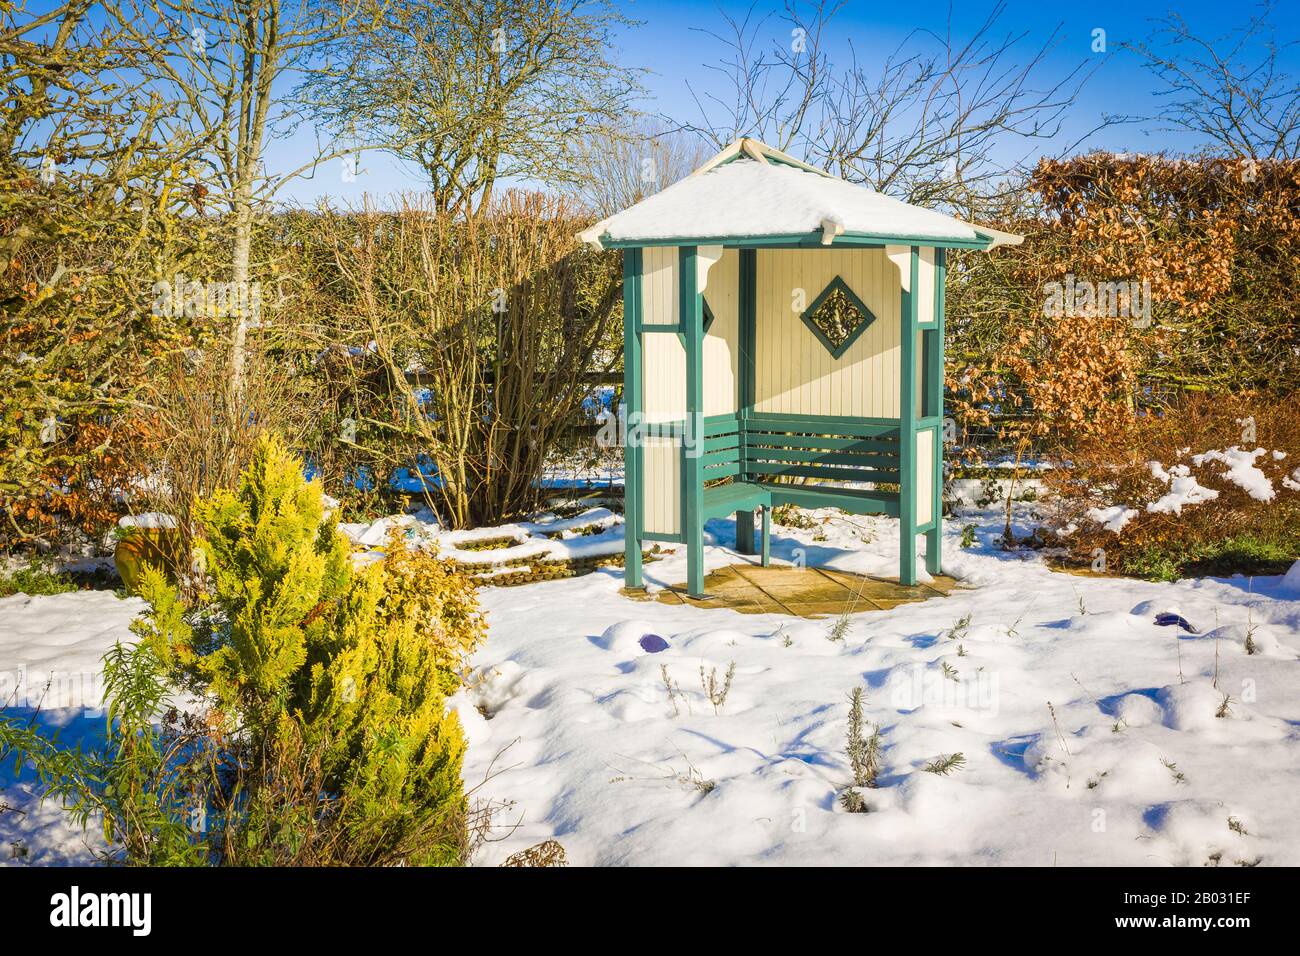 Winter snow fall transforms the pleasure garden, concealing many small plants and adding light to seasonal greyness. An arbour is still reachable and useful on sunny days Stock Photo